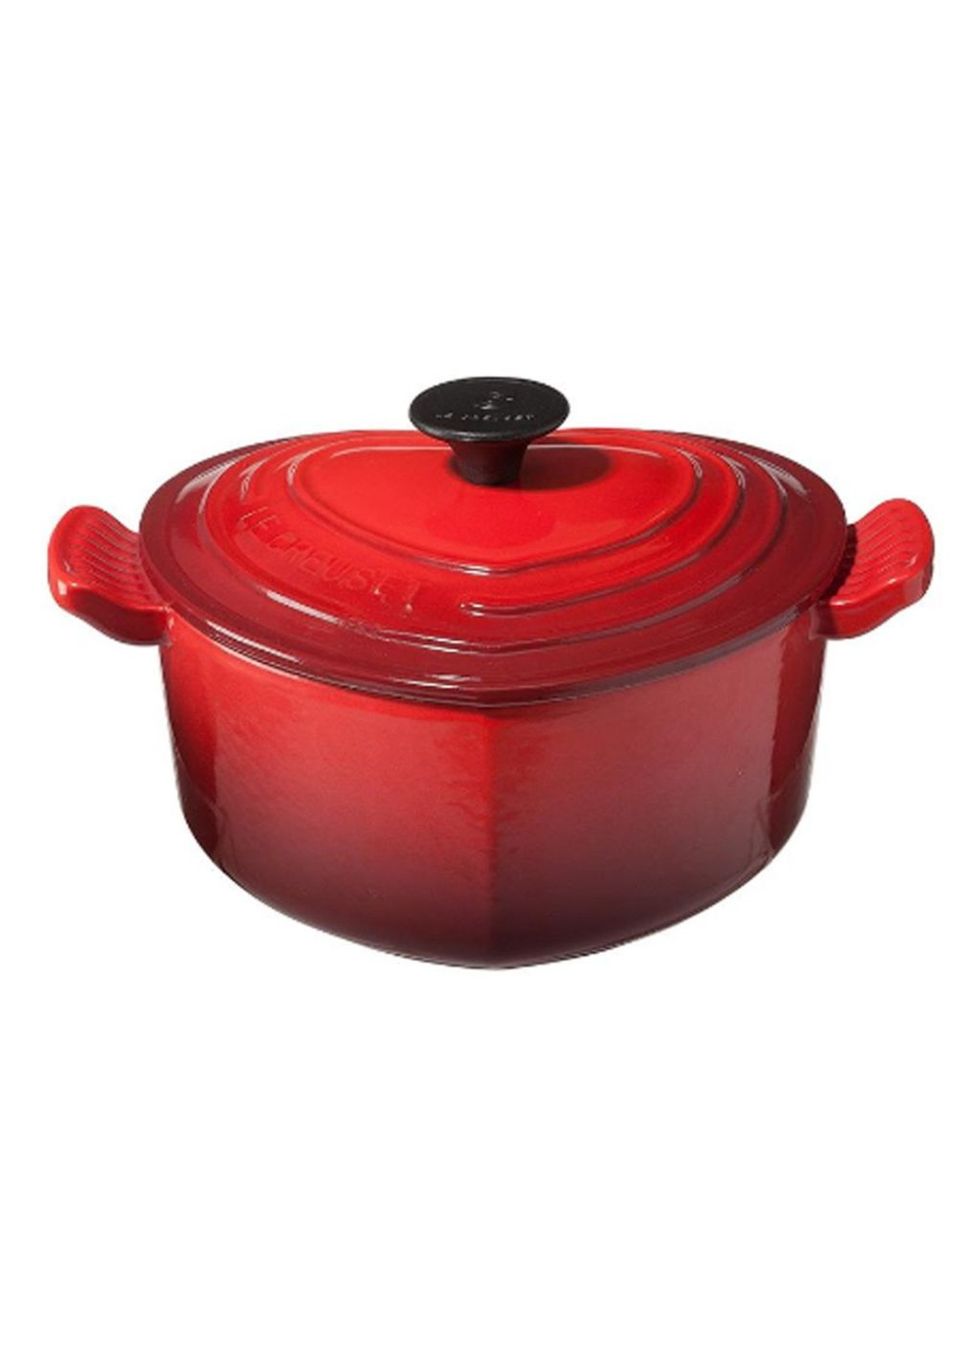 Red, Cookware and bakeware, Lid, Maroon, Carmine, Tureen, Dutch oven, Crock, Gas, Coquelicot, 